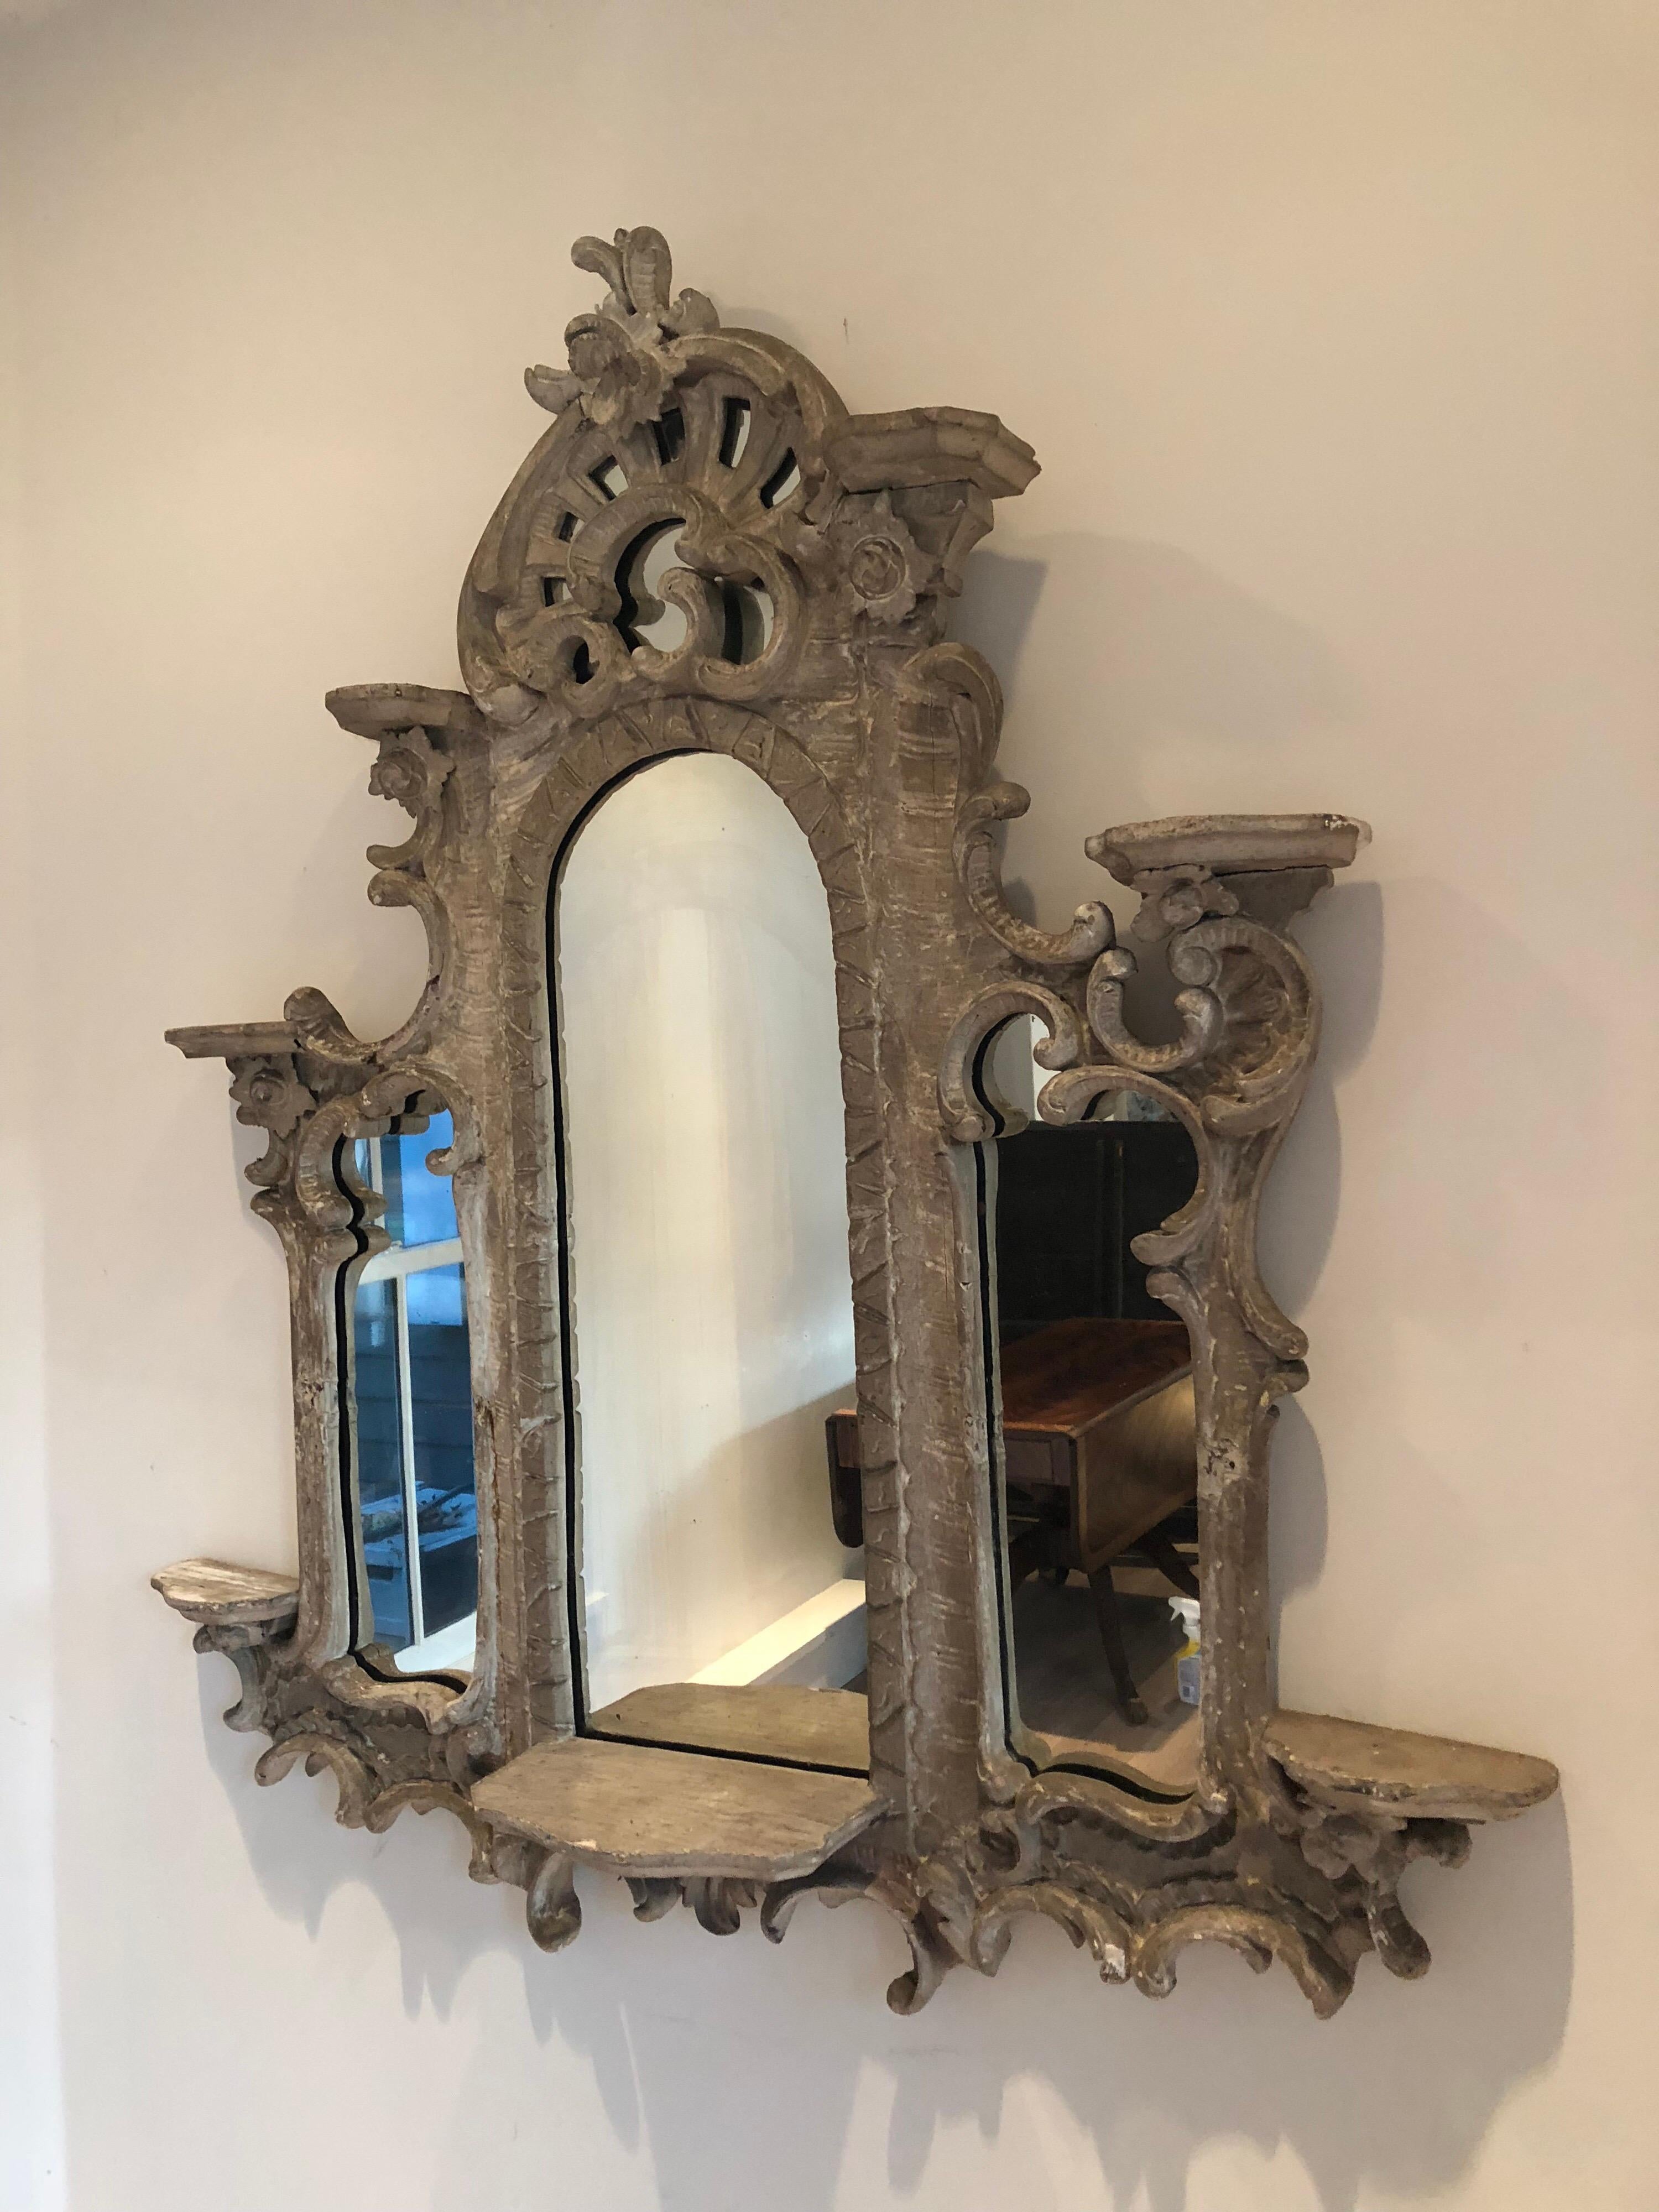 18th century French heavily carved wood triptych mirror. Combined with seven shelves. Original distress painted frame with newer mirror panels.